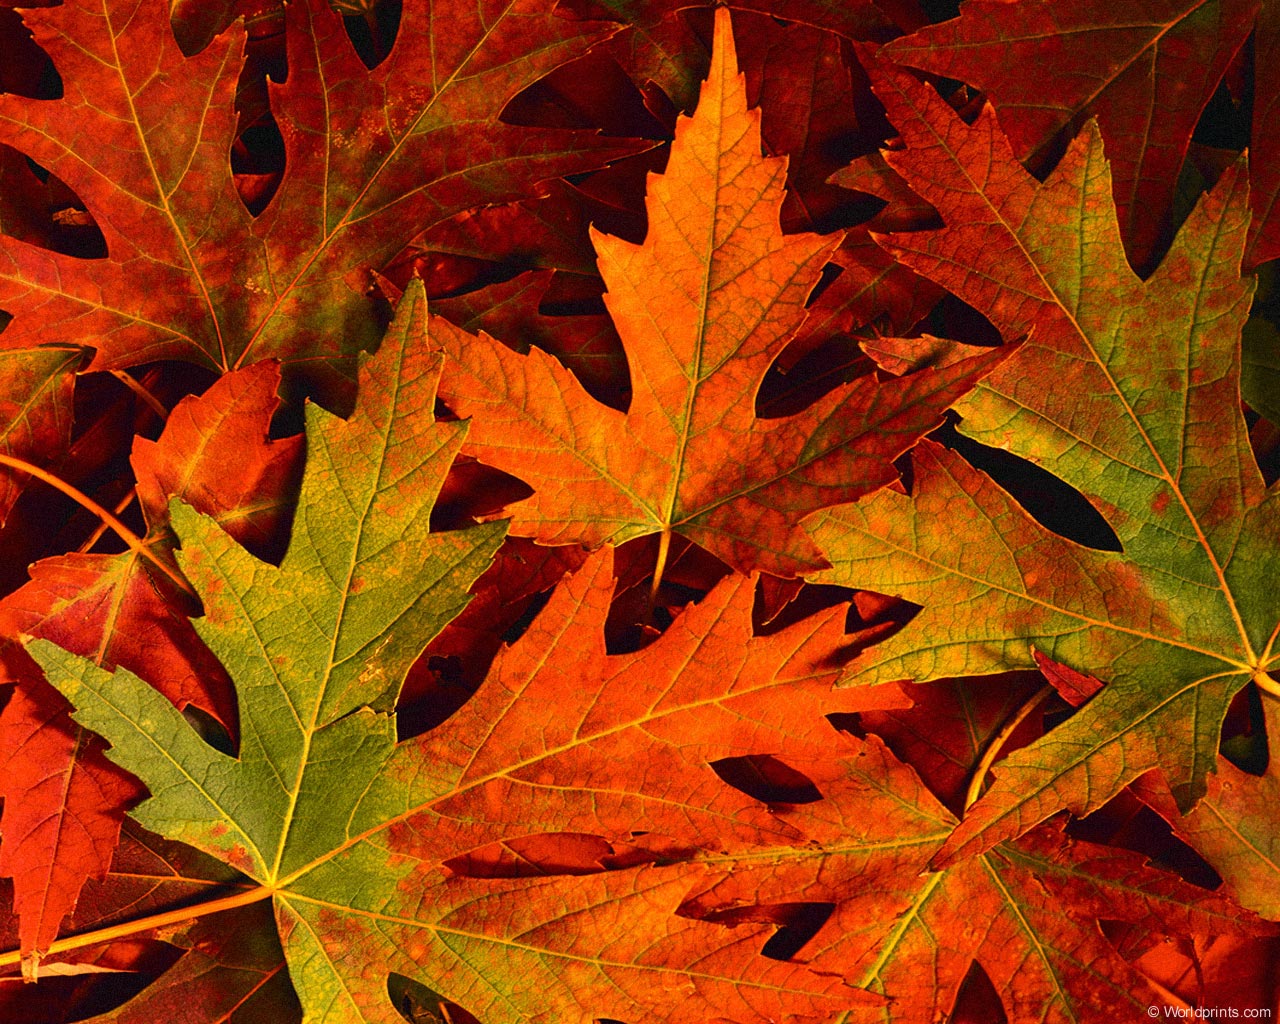  URL httpwwwphotography matchcomwallpapers1793 fall leaves